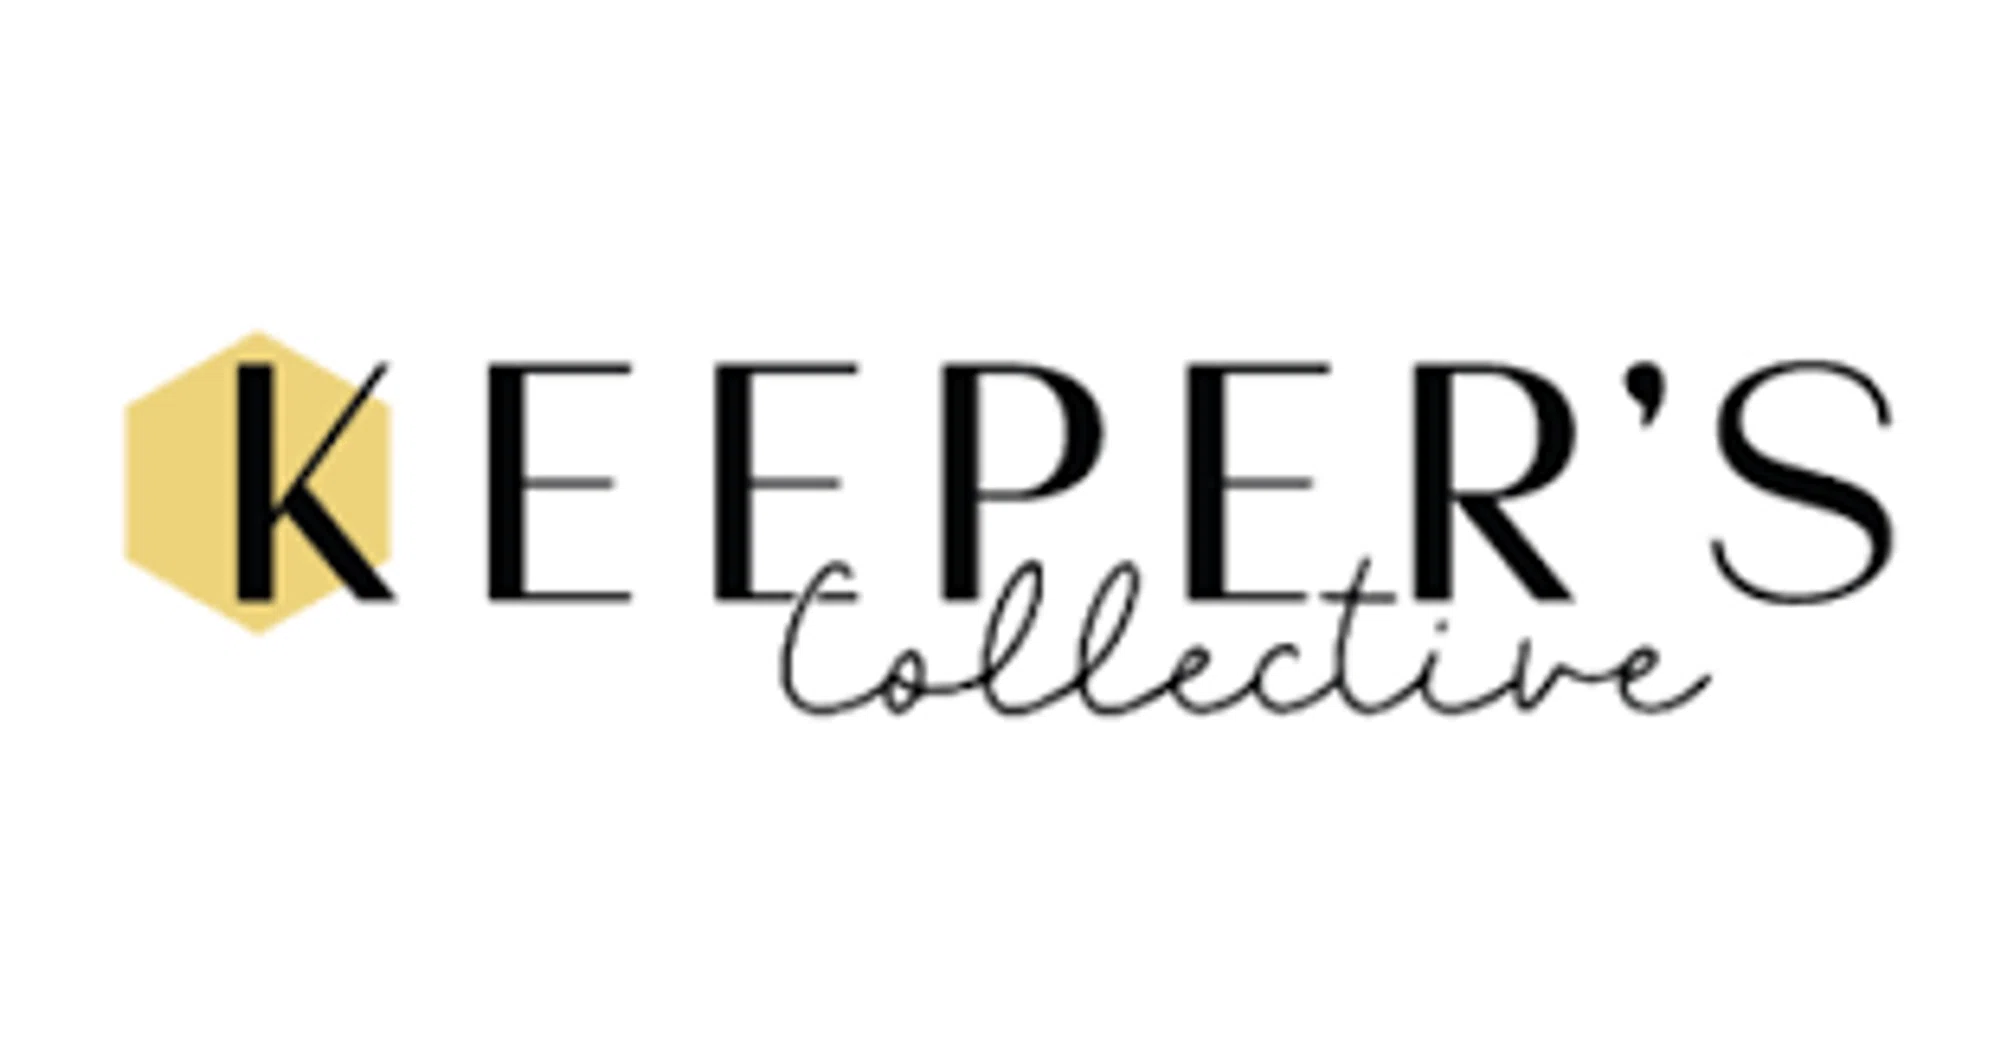 Keeper’s Collective